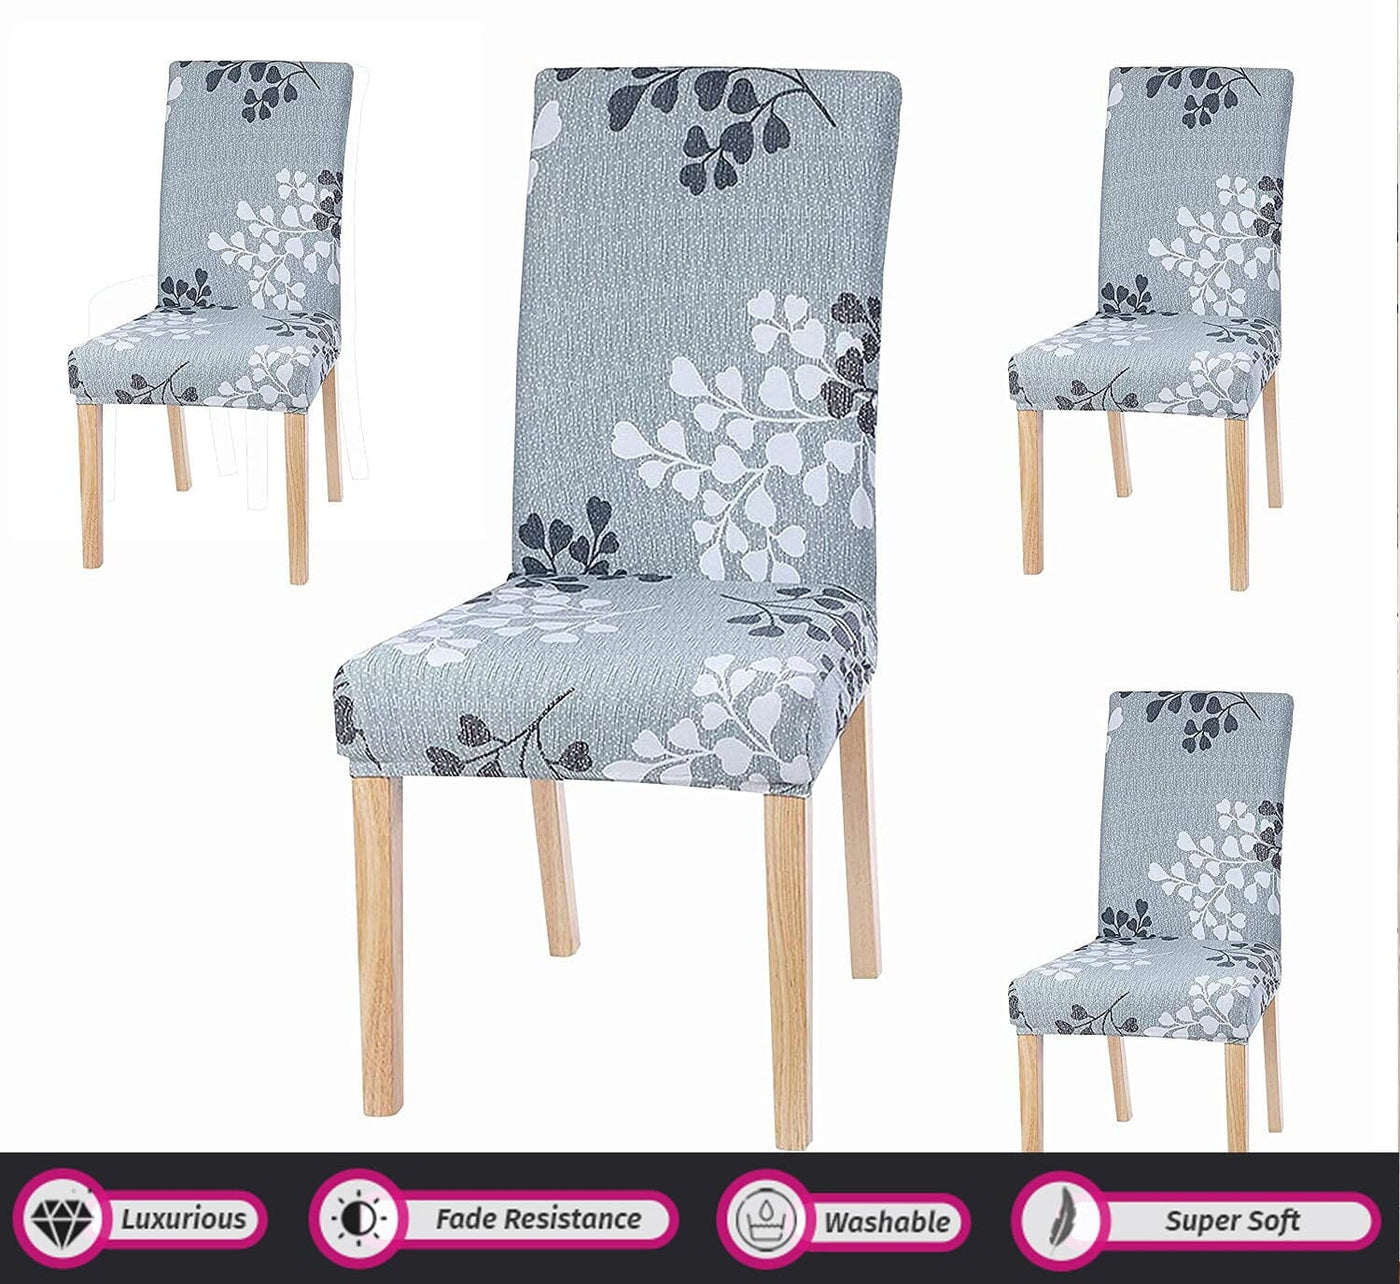 Premium Chair Cover - Stretchable & Elastic Fitted Great Happy IN Grey Petals 2 PCS - ₹799 